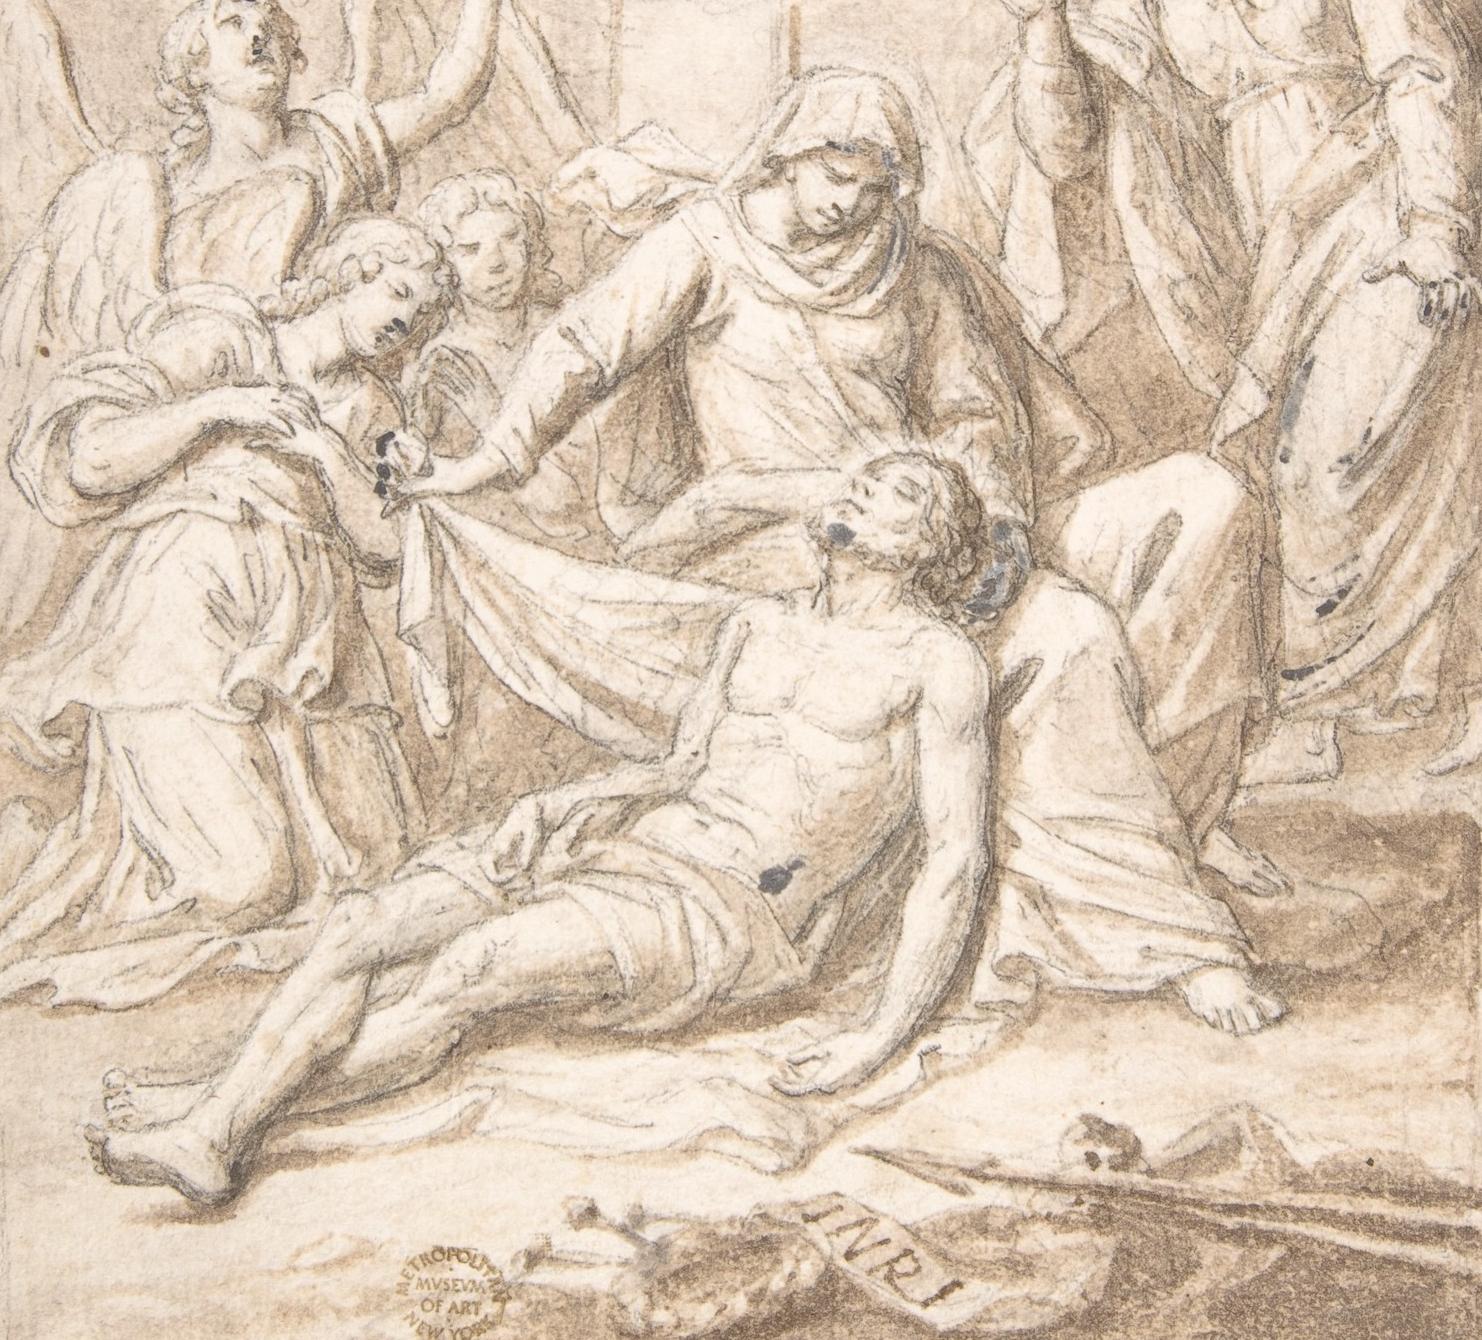 Anonymous, Pietà, 17th century. Brush and brown wash over black chalk, highlighted with white gouache, on light tan paper; framing outlines in black chalk. 8-9/16 x 6-3/8 in. (21.8 x 16.2 cm).